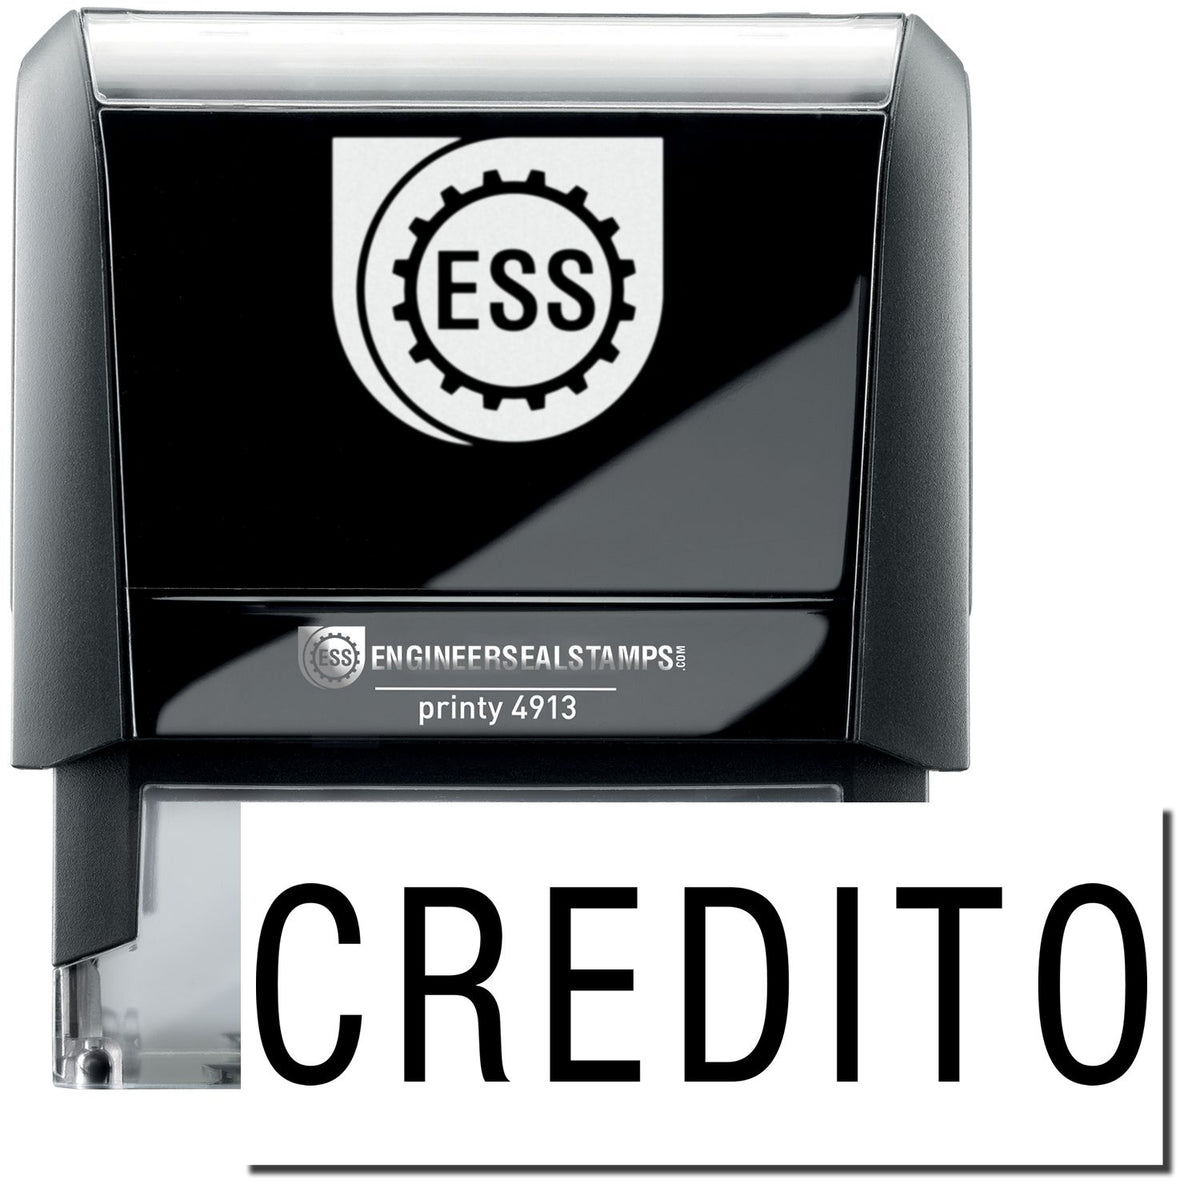 A self-inking stamp with a stamped image showing how the text &quot;CREDITO&quot; in a large font is displayed by it after stamping.